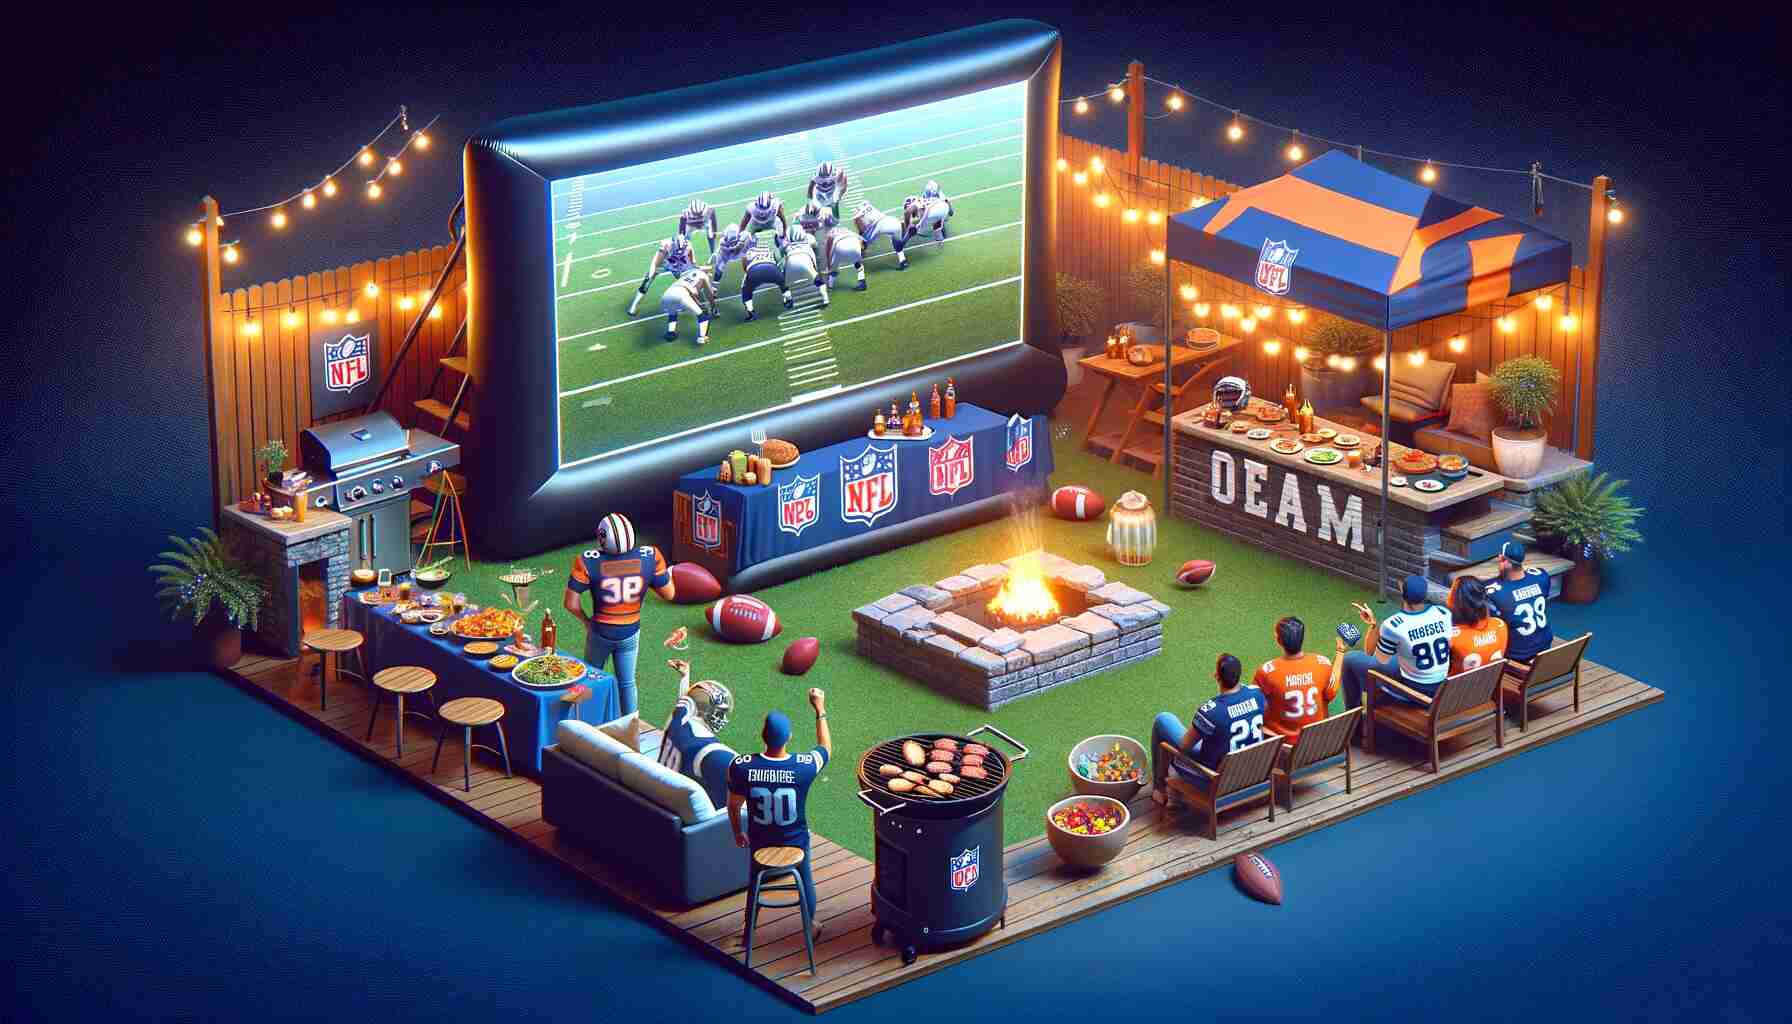 An outdoor NFL playoff party scene with a large inflatable screen showing a football game, people in team jerseys enjoying themselves, a BBQ grill with food, festive string lights, and a cozy fire pit.